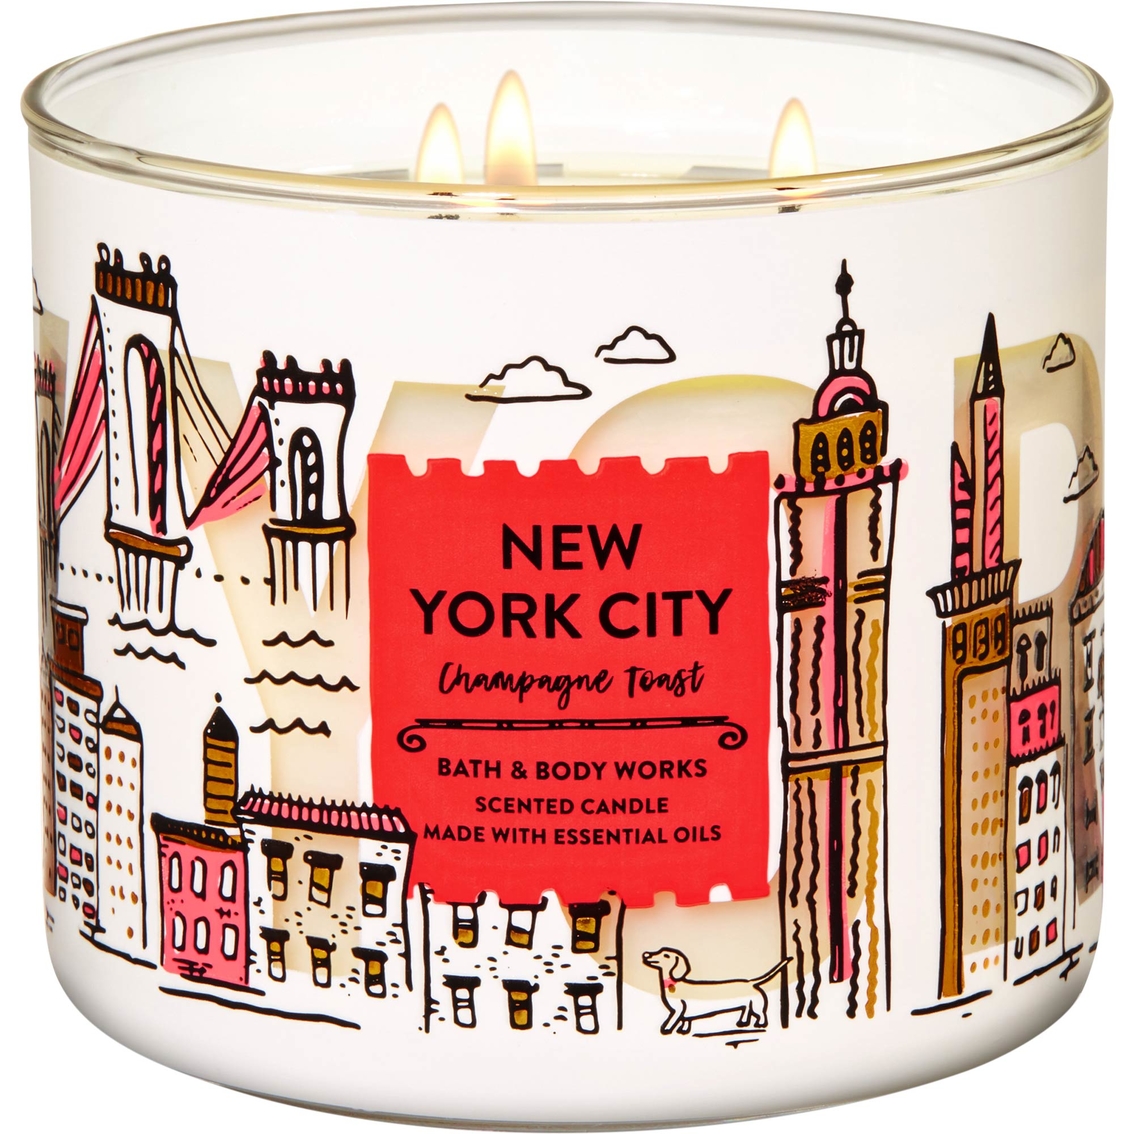 Bath & Body Works Going Places New York City Champagne Toast 3 Wick